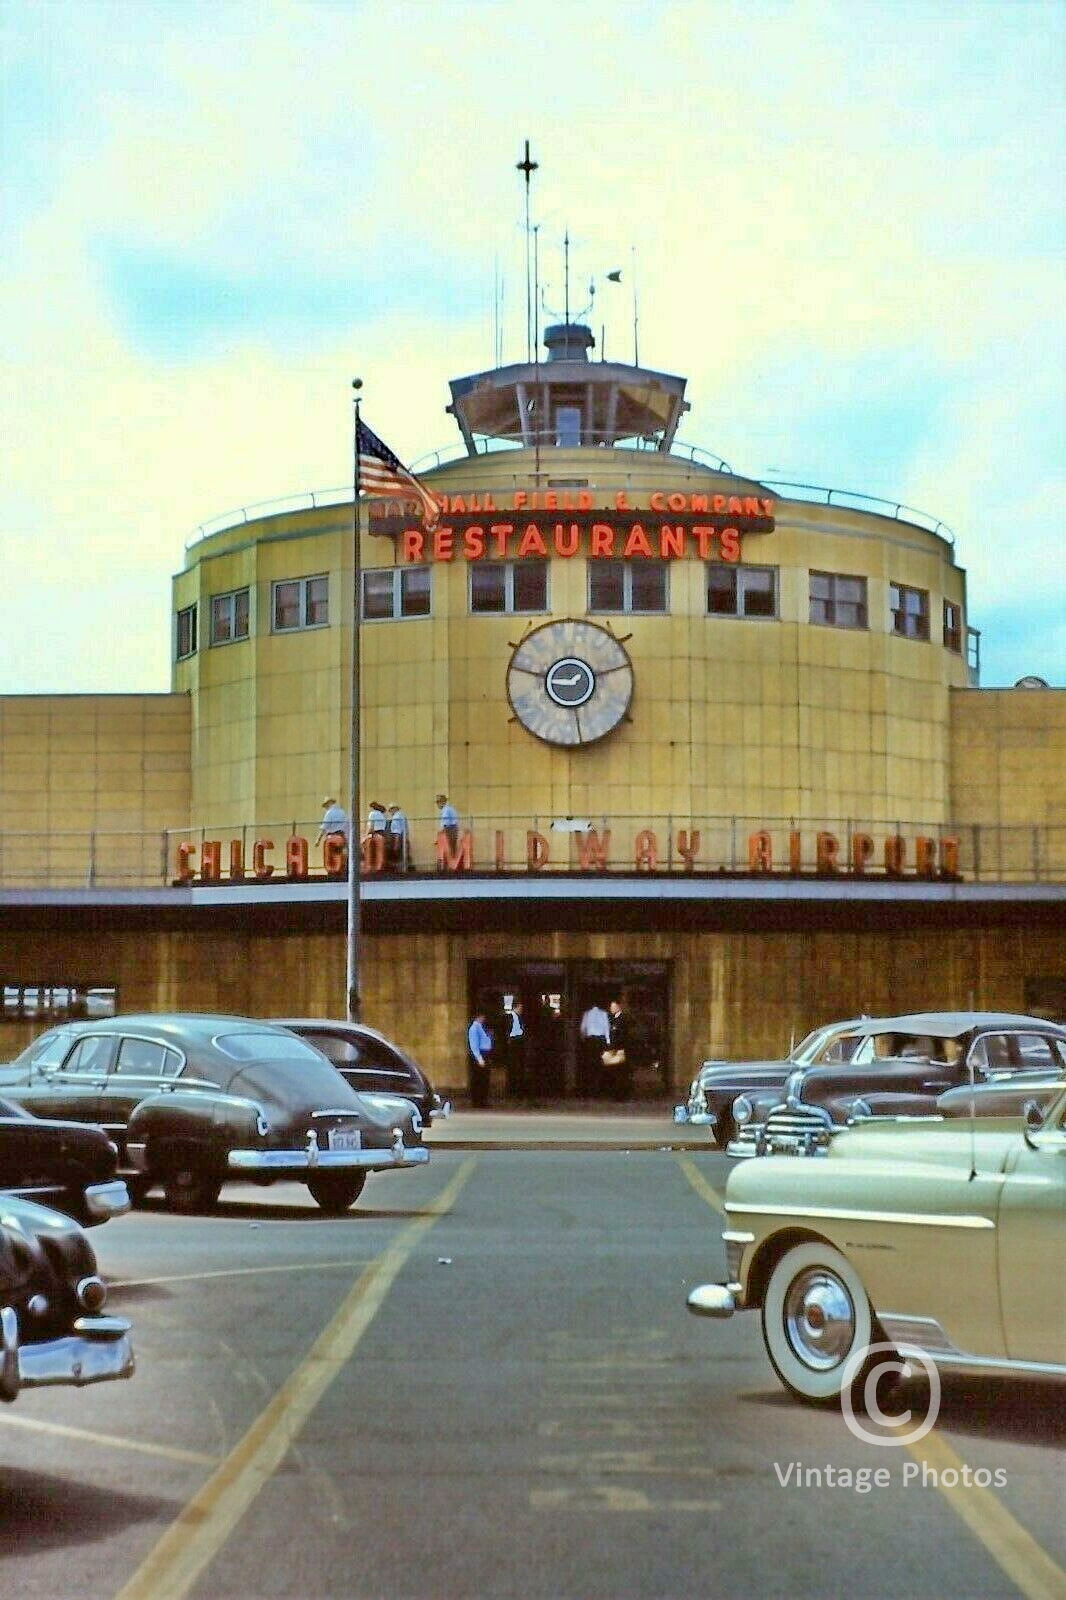 1950s Chicago Midway Airport - Marshall Field Restaurants